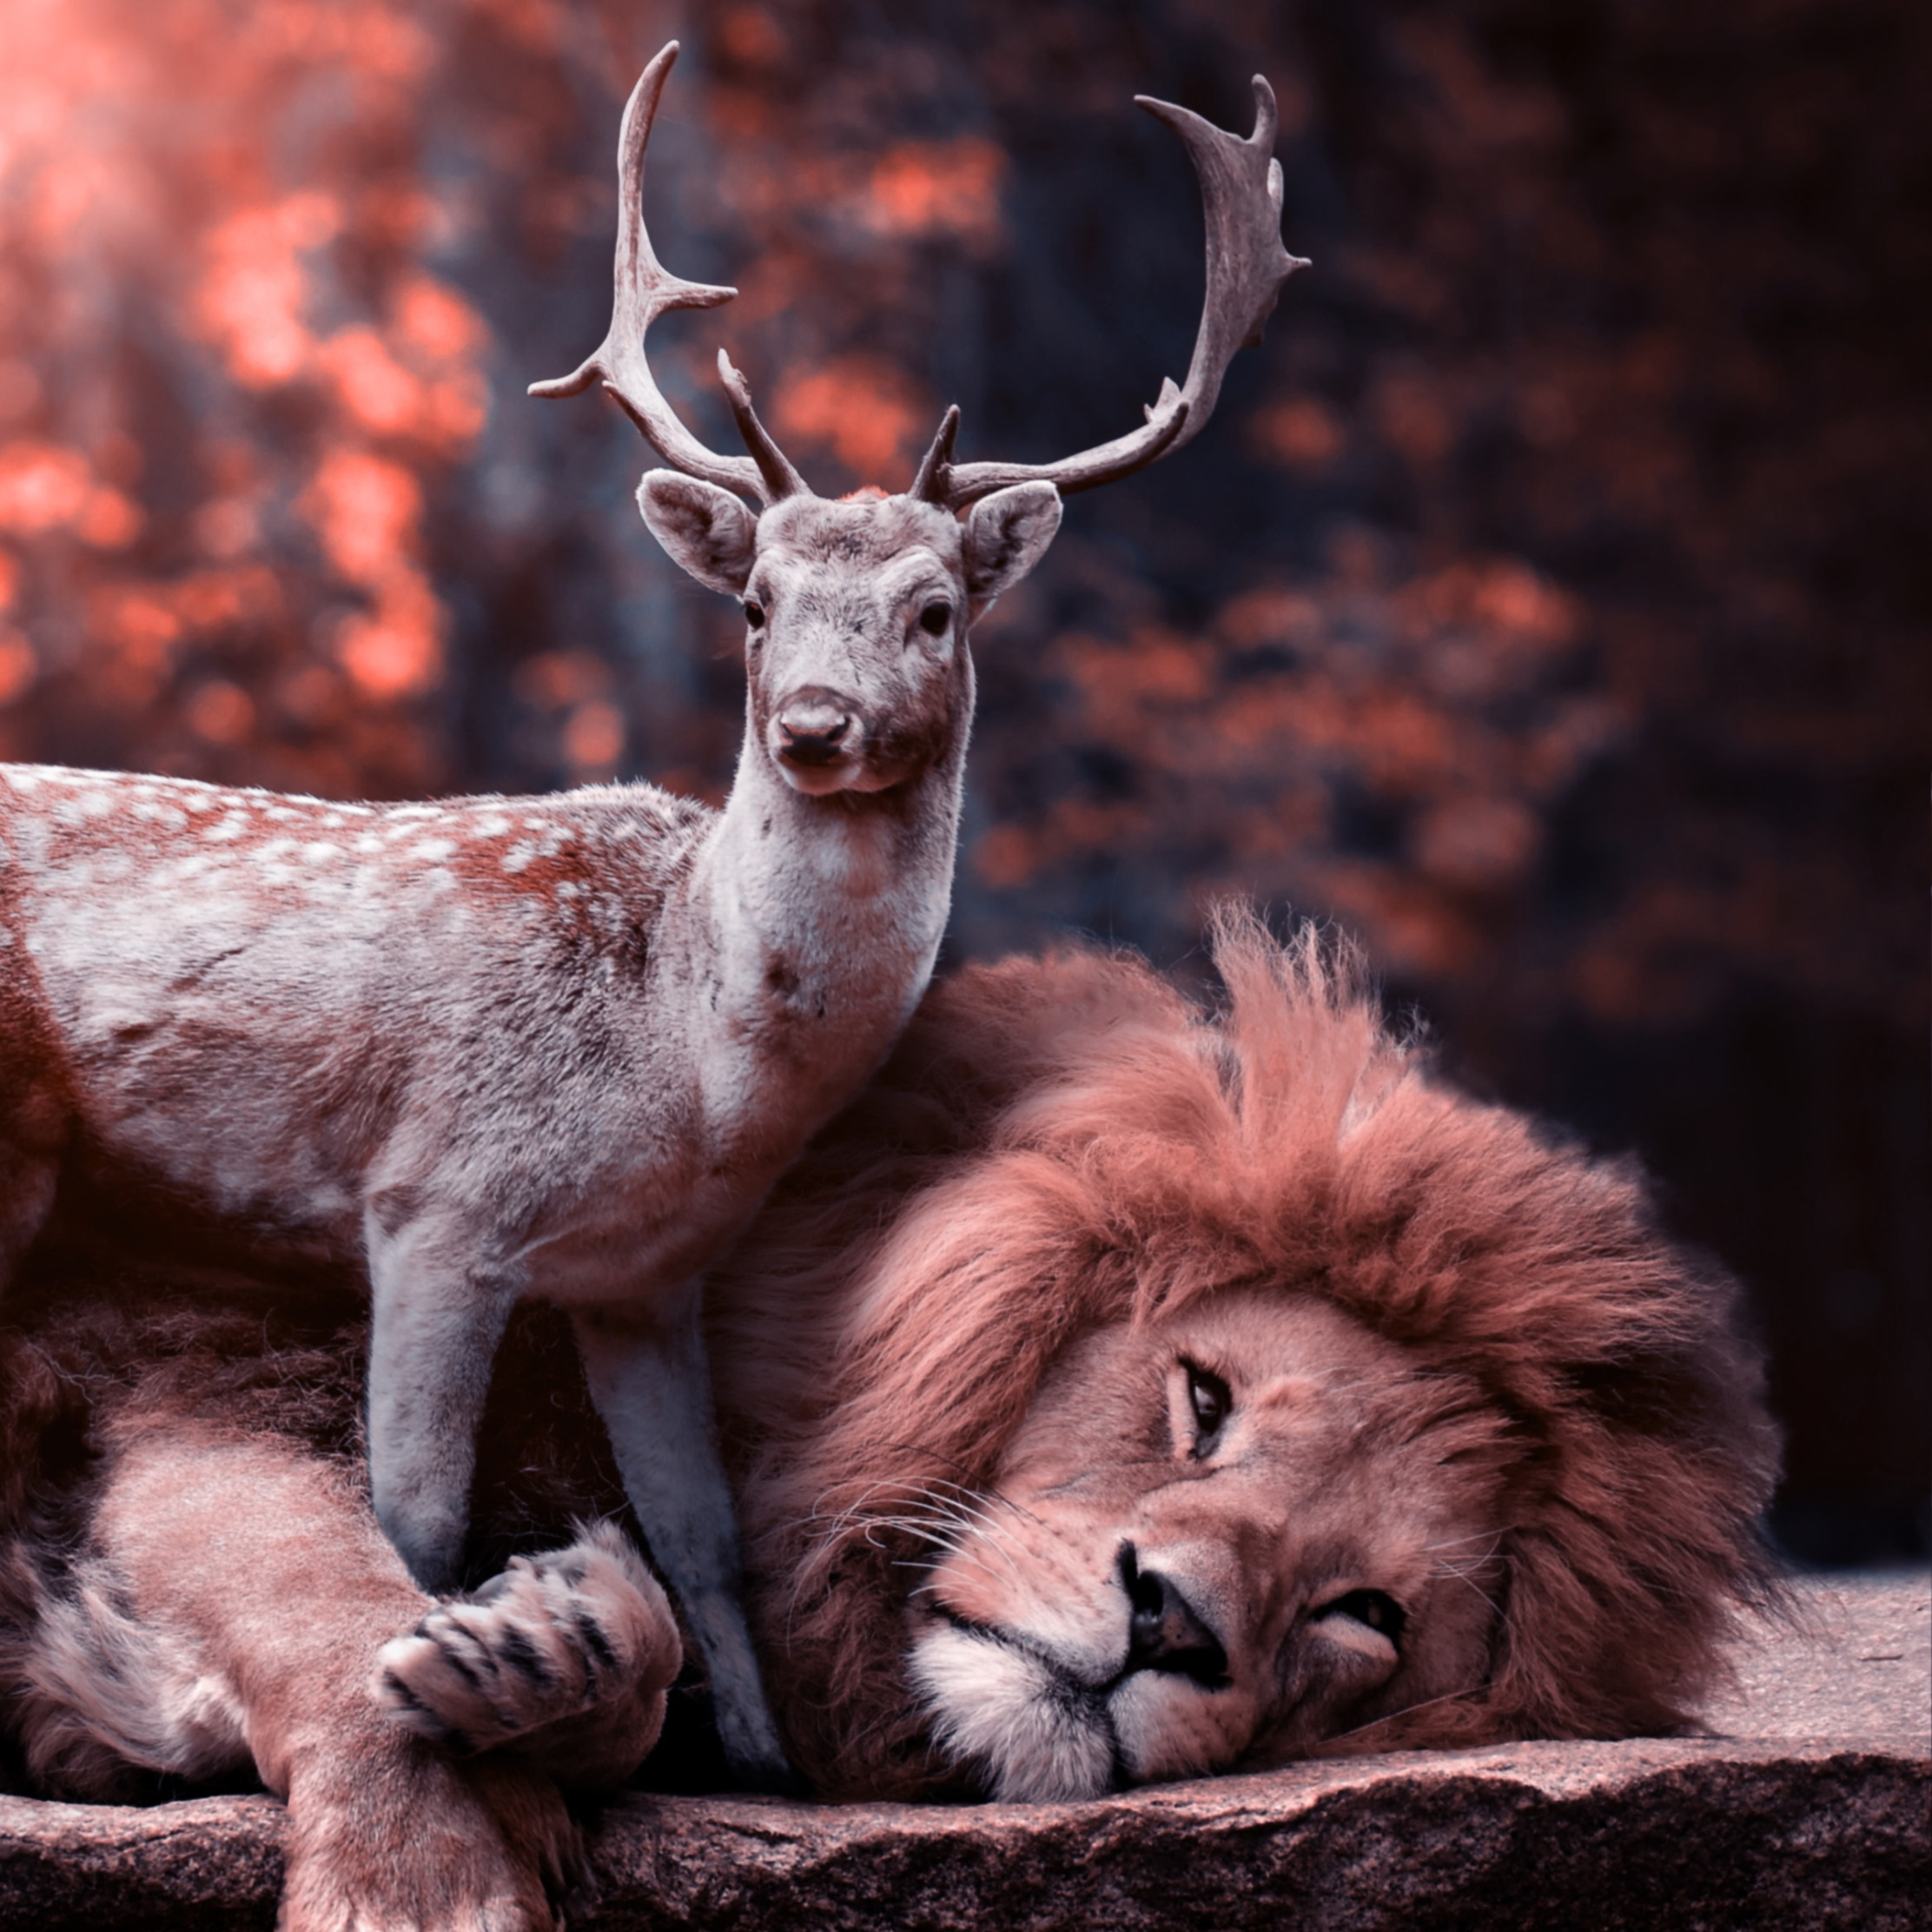 The lion and the deer wallpaper 2224x2224